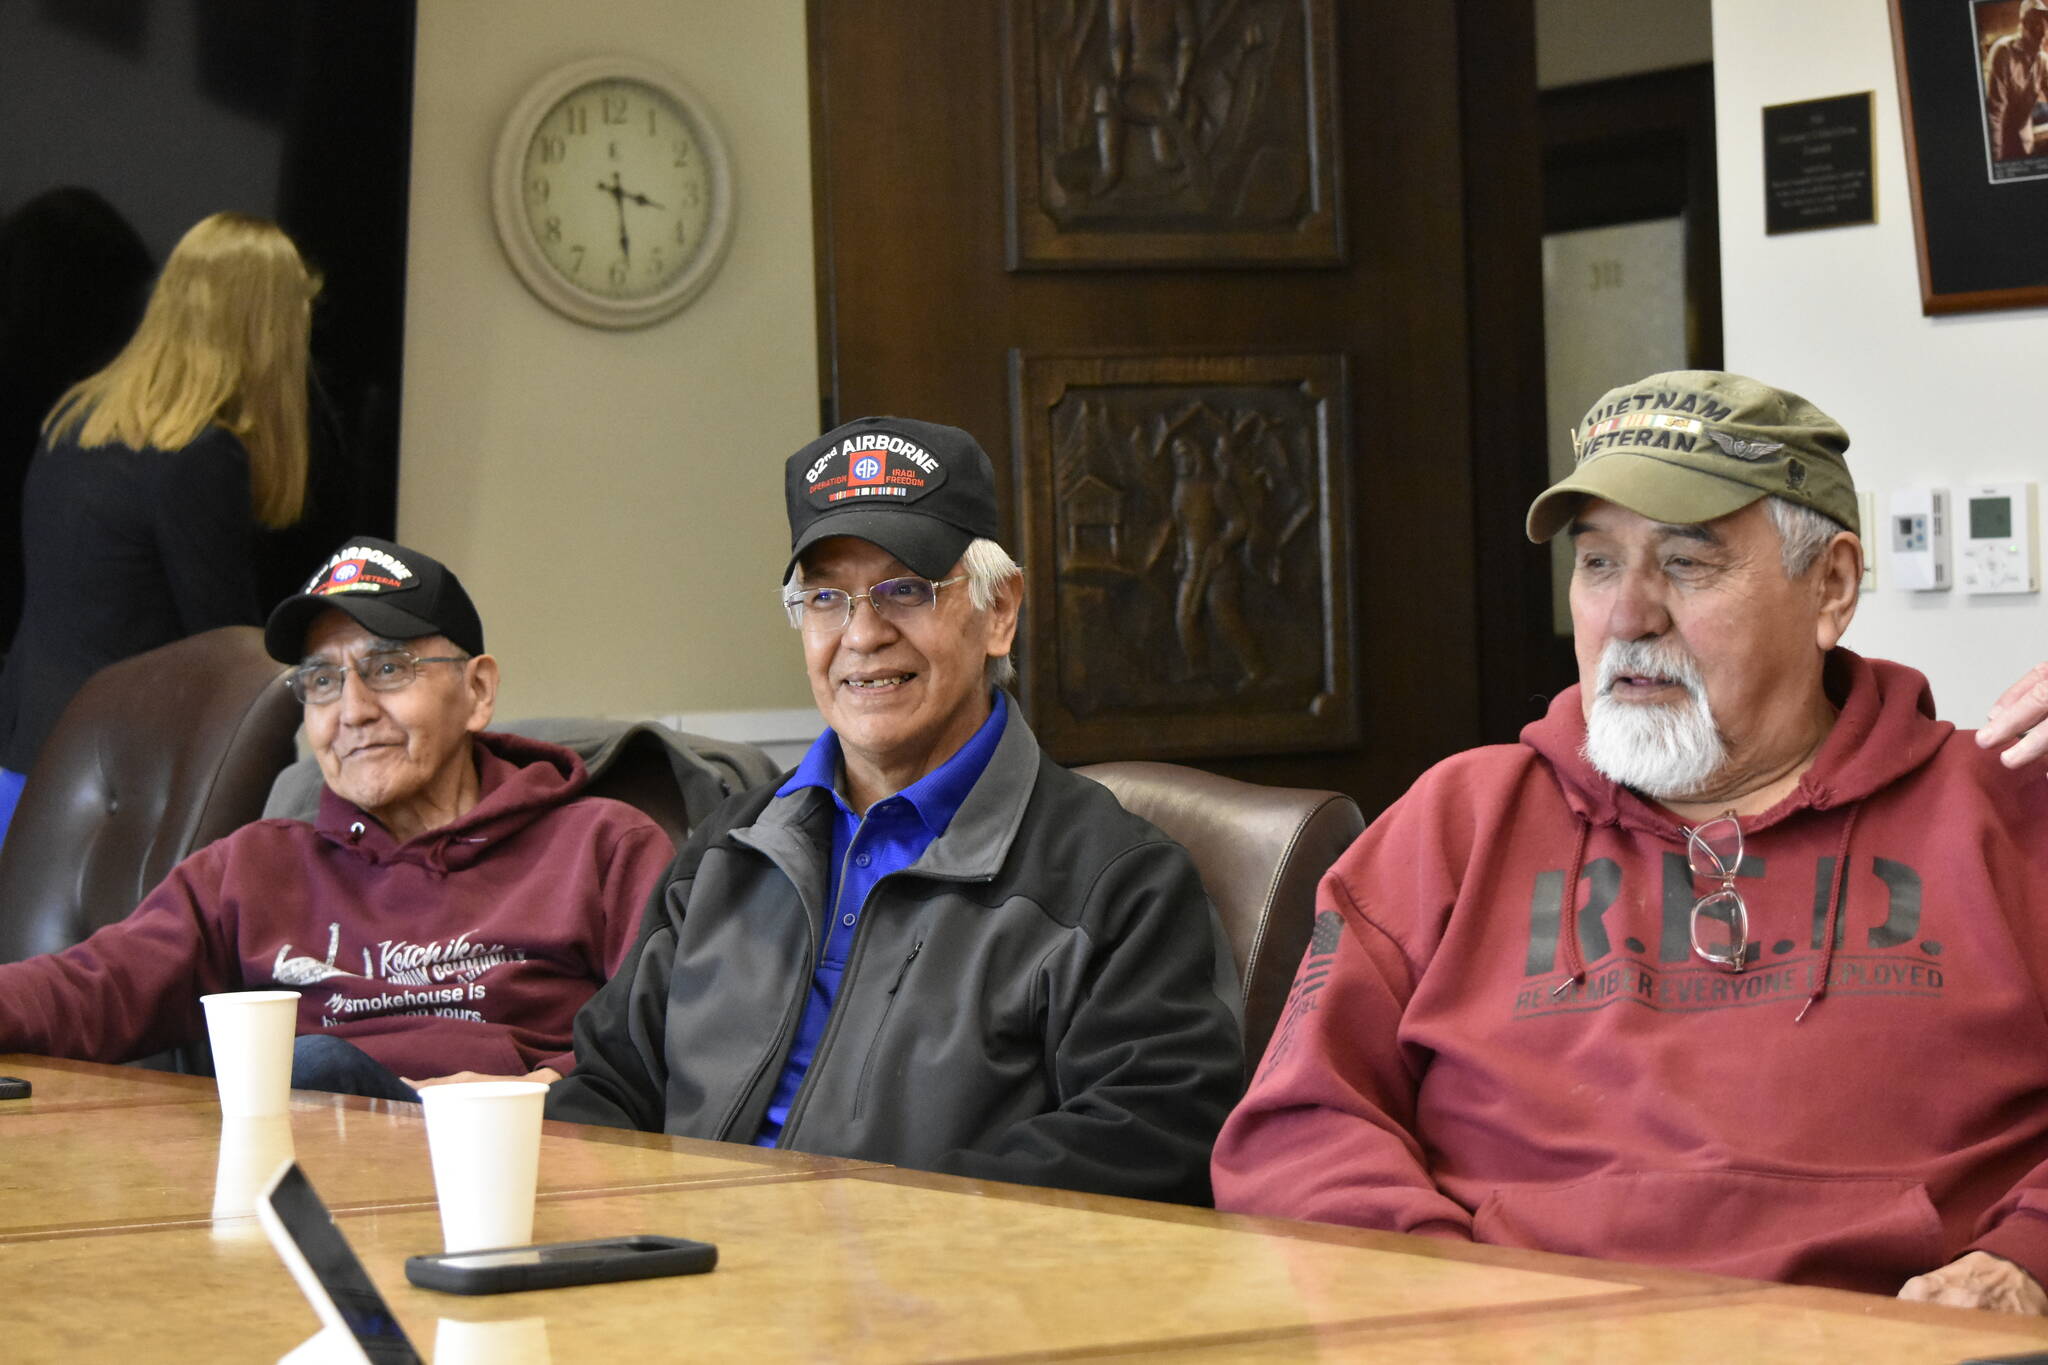 From left to right, Willard Jackson, Dennis Jack and Bill Thomas, Alaska Native veterans form Southeast Alaska met with lawmakers at the Alaska State Capitol on Friday, April 29, to discuss their issues getting land allotments from the federal government. Jackson and Thomas are veterans of the Vietnam war who are eligbile for land allotments, but no lands are available in Southeast Alaska, and veterans are frustrated by the lack of action. (Peter Segall / Juneau Empire)